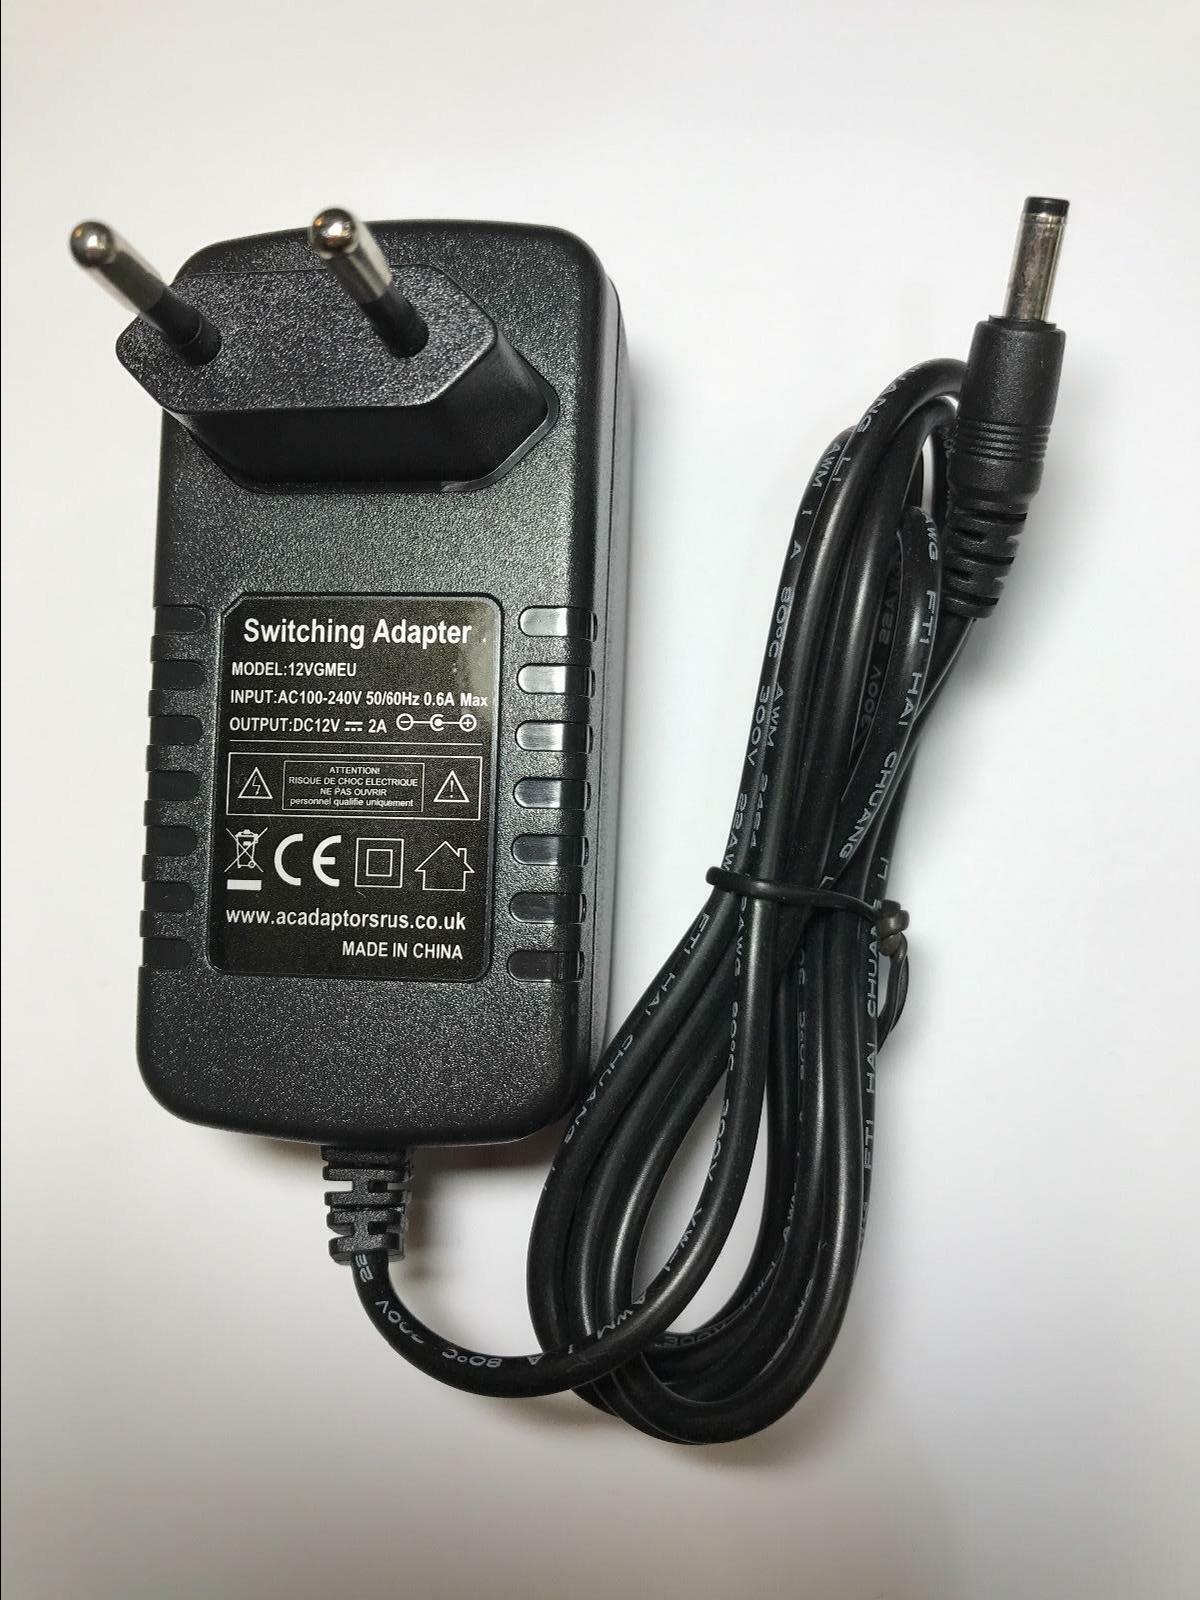 Philips AY4130/05 DVD Player Switching Adapter 12V 2A 4mm 1.7mm DC Plug EU Output Voltage(s): 12V MPN: Q1-12VGMEU-65 - Click Image to Close